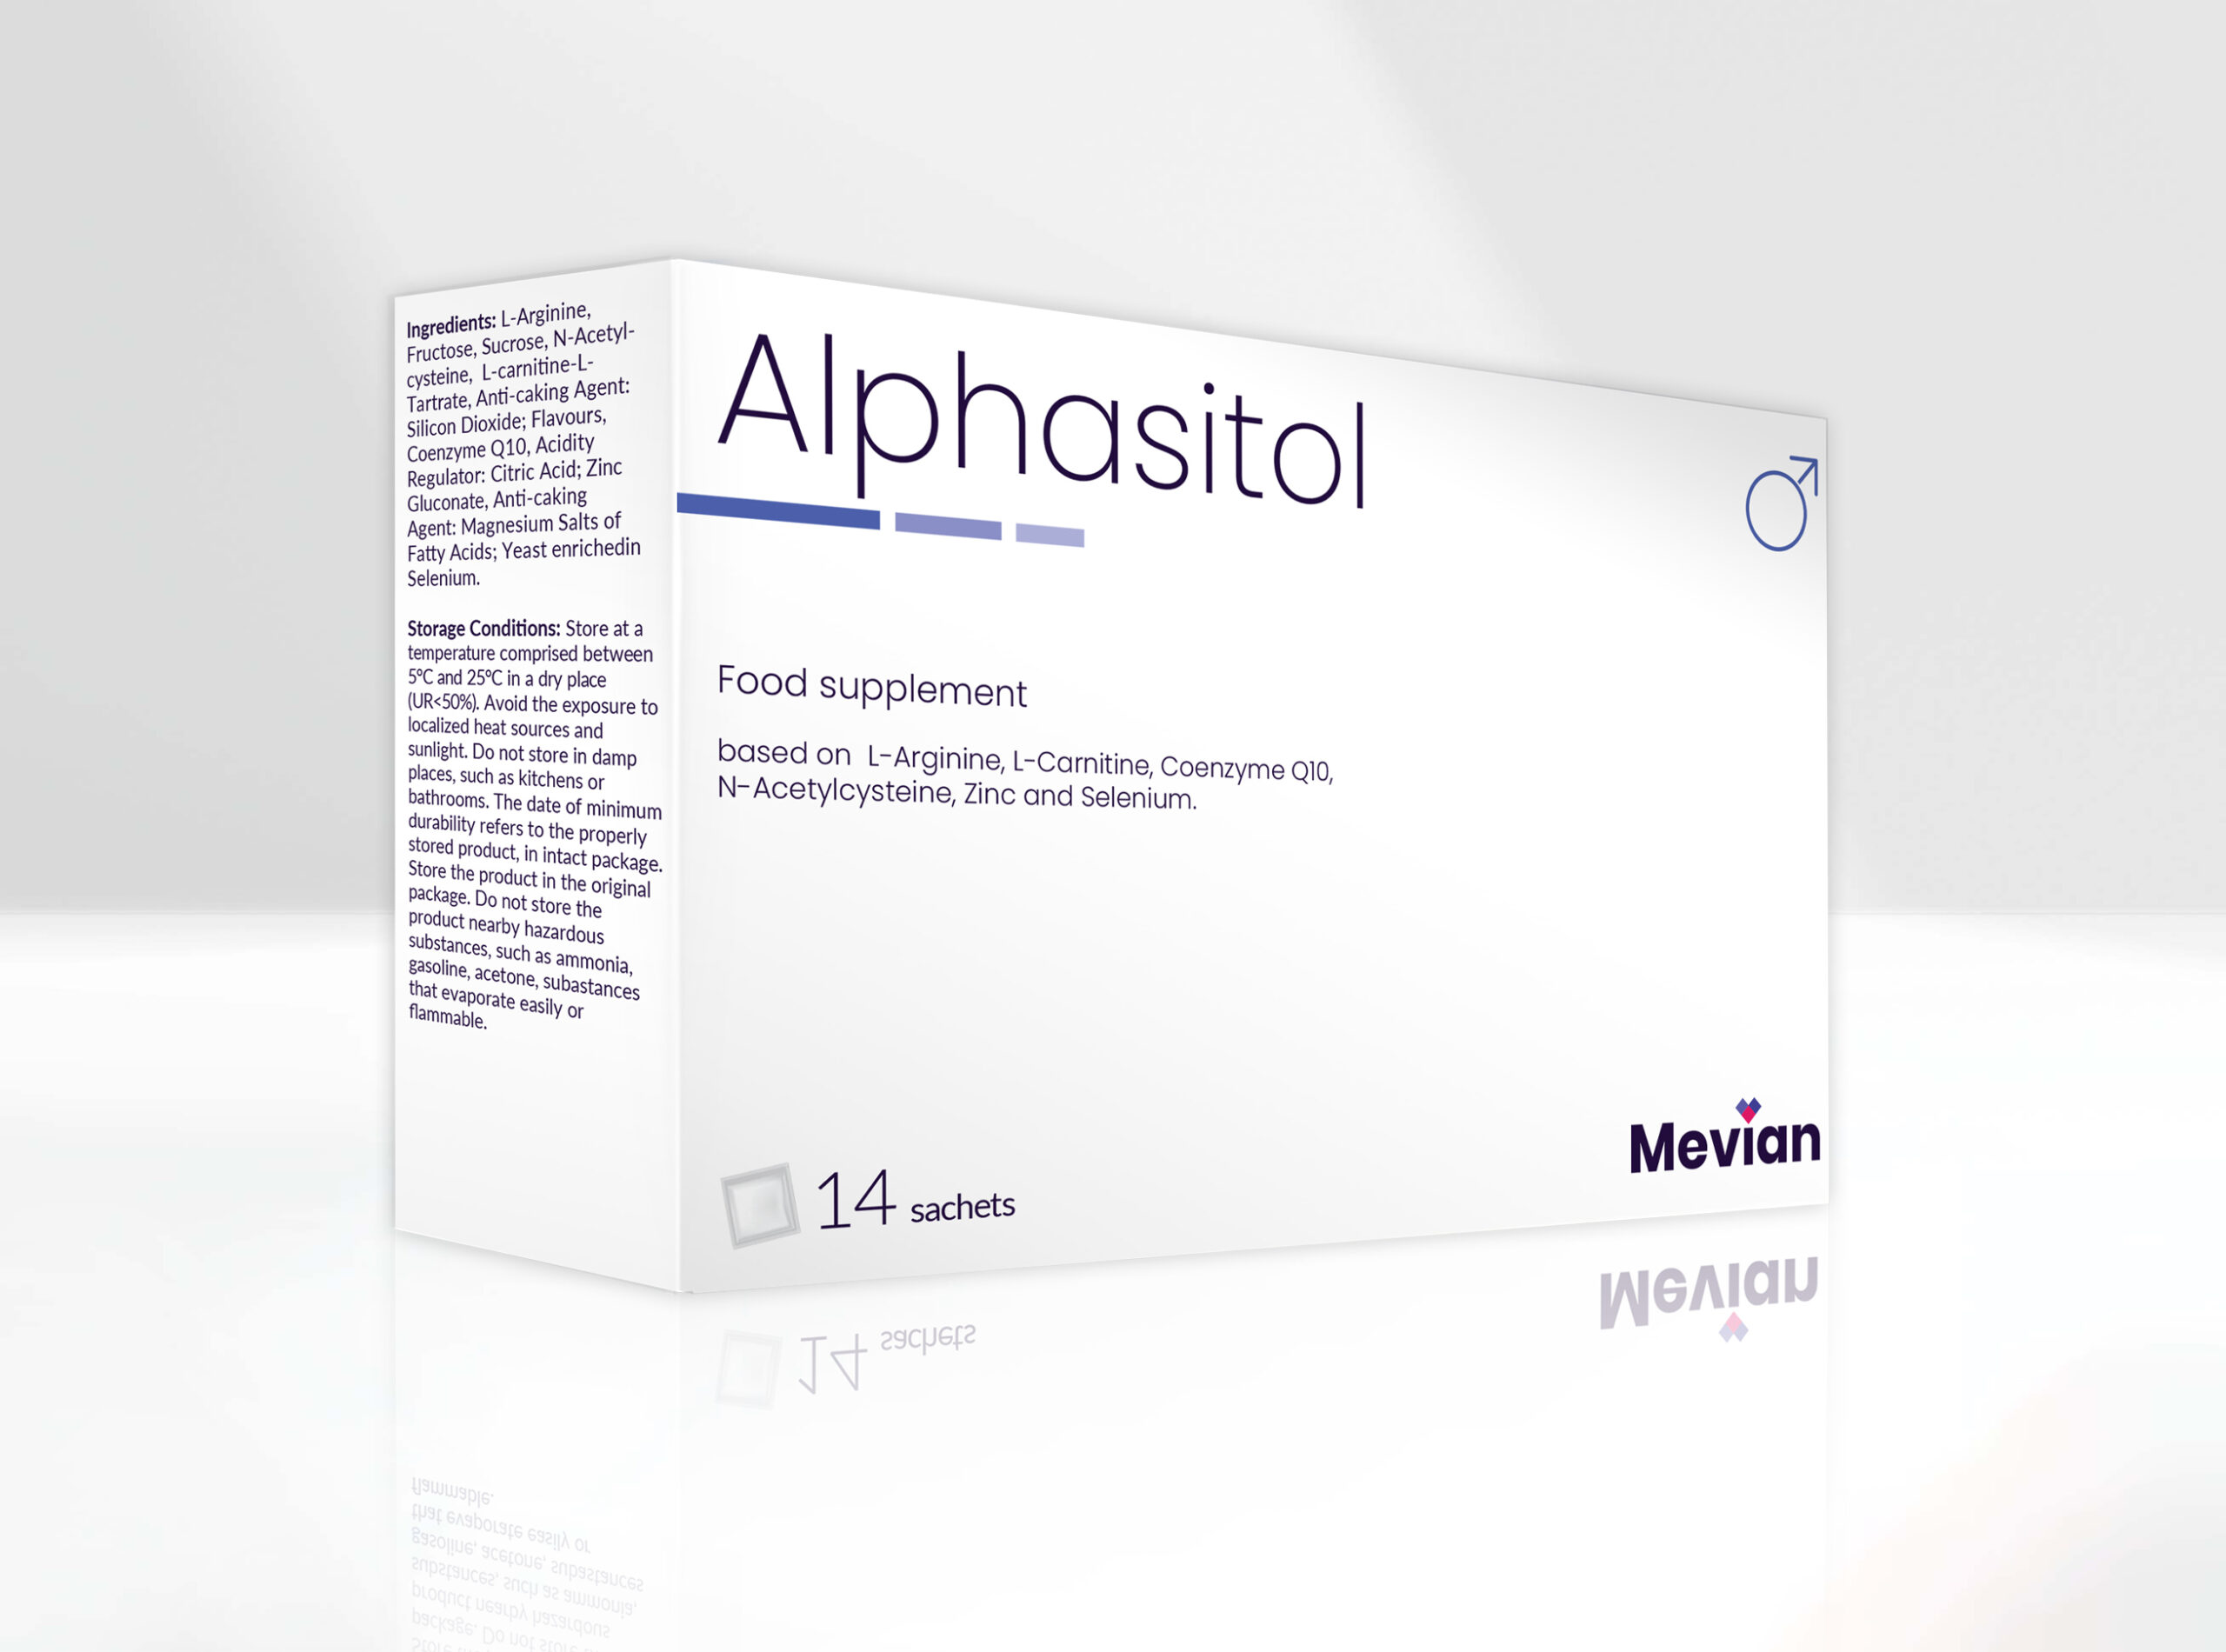 Alphasitol is a clinically tested product that improves normal spermatogenesis and normal fertility and reproduction, to maintain normal testosterone levels in the blood, for males.